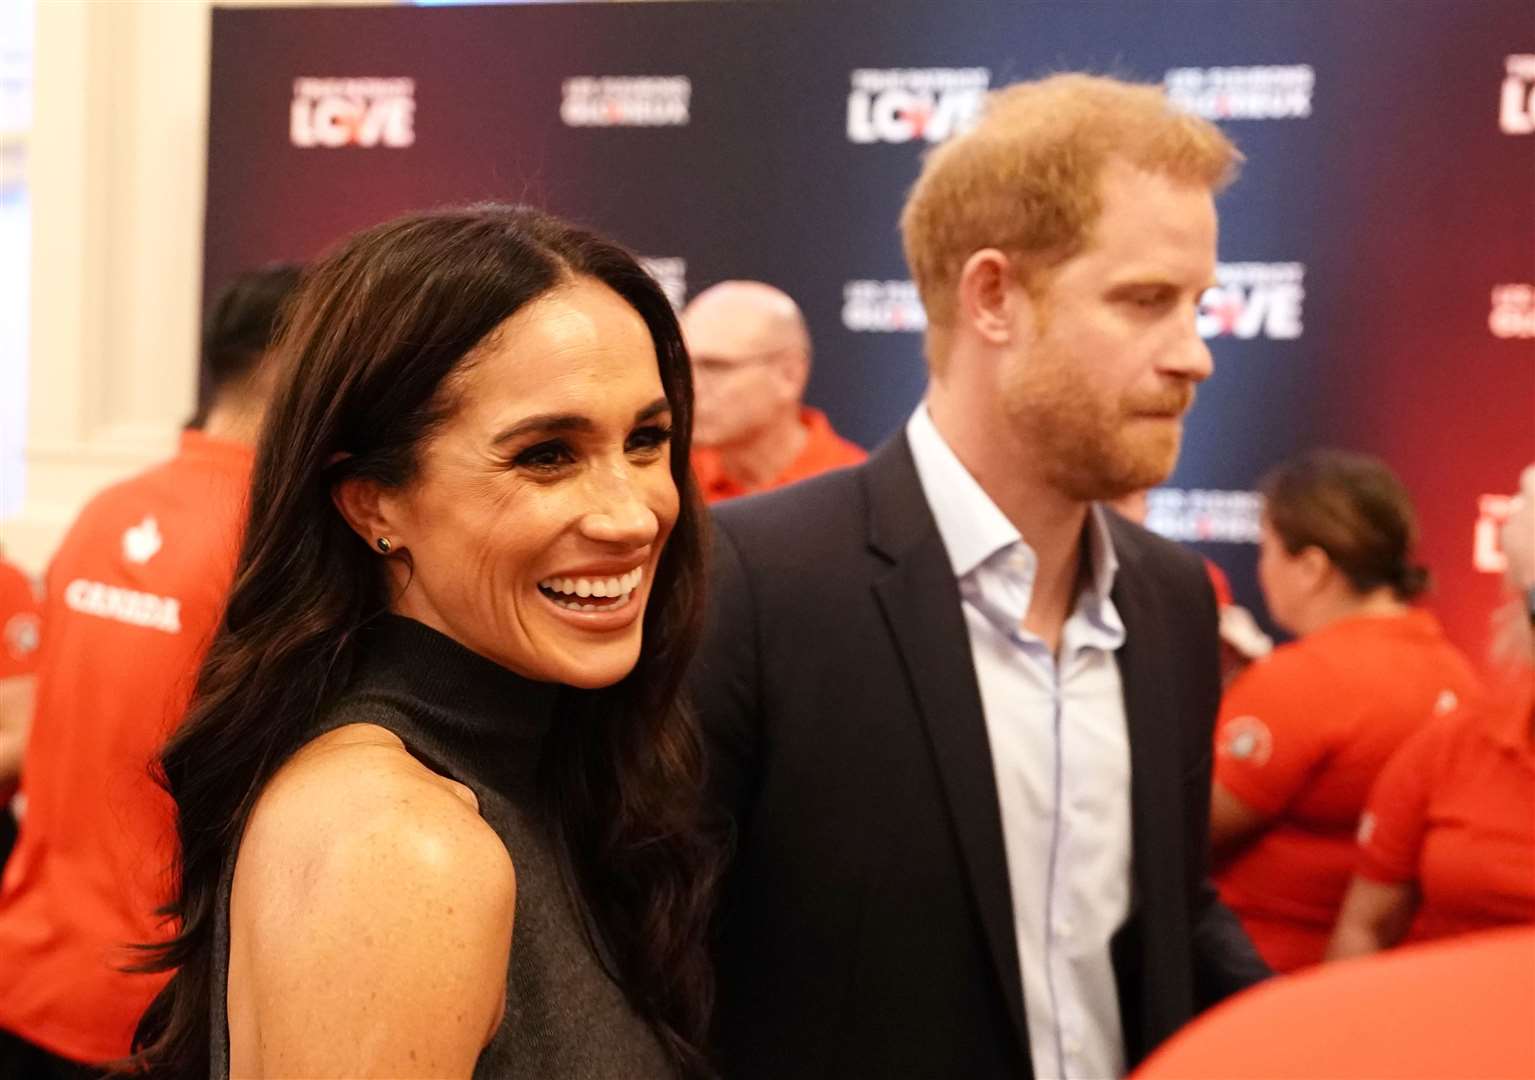 The Duke and Duchess of Sussex during the Invictus Games in Dusseldorf, Germany (Jordan Pettitt/PA)